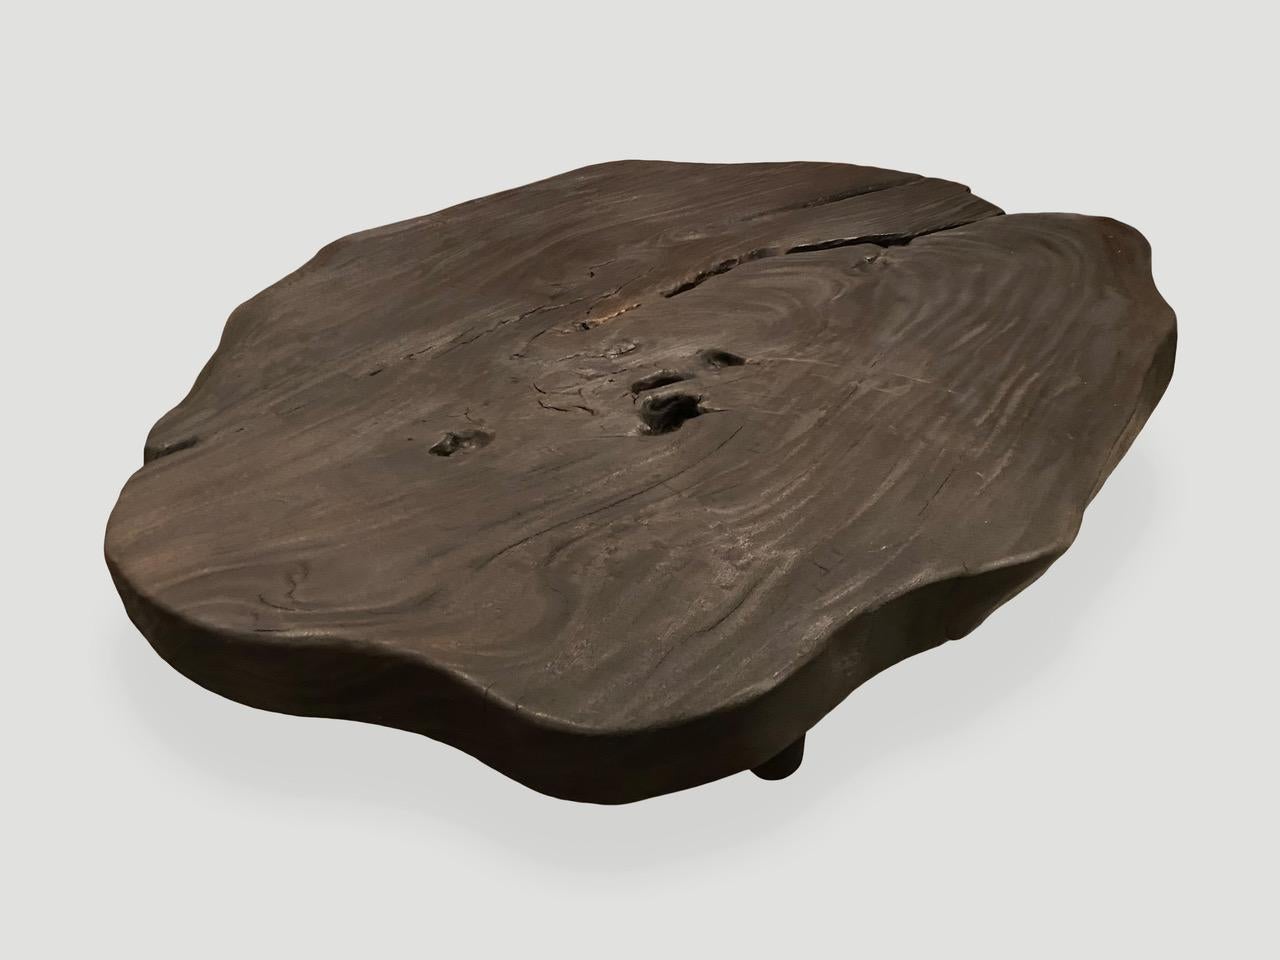 Andrianna Shamaris Impressive Single Slab Suar Wood Charred Coffee Table In Excellent Condition For Sale In New York, NY